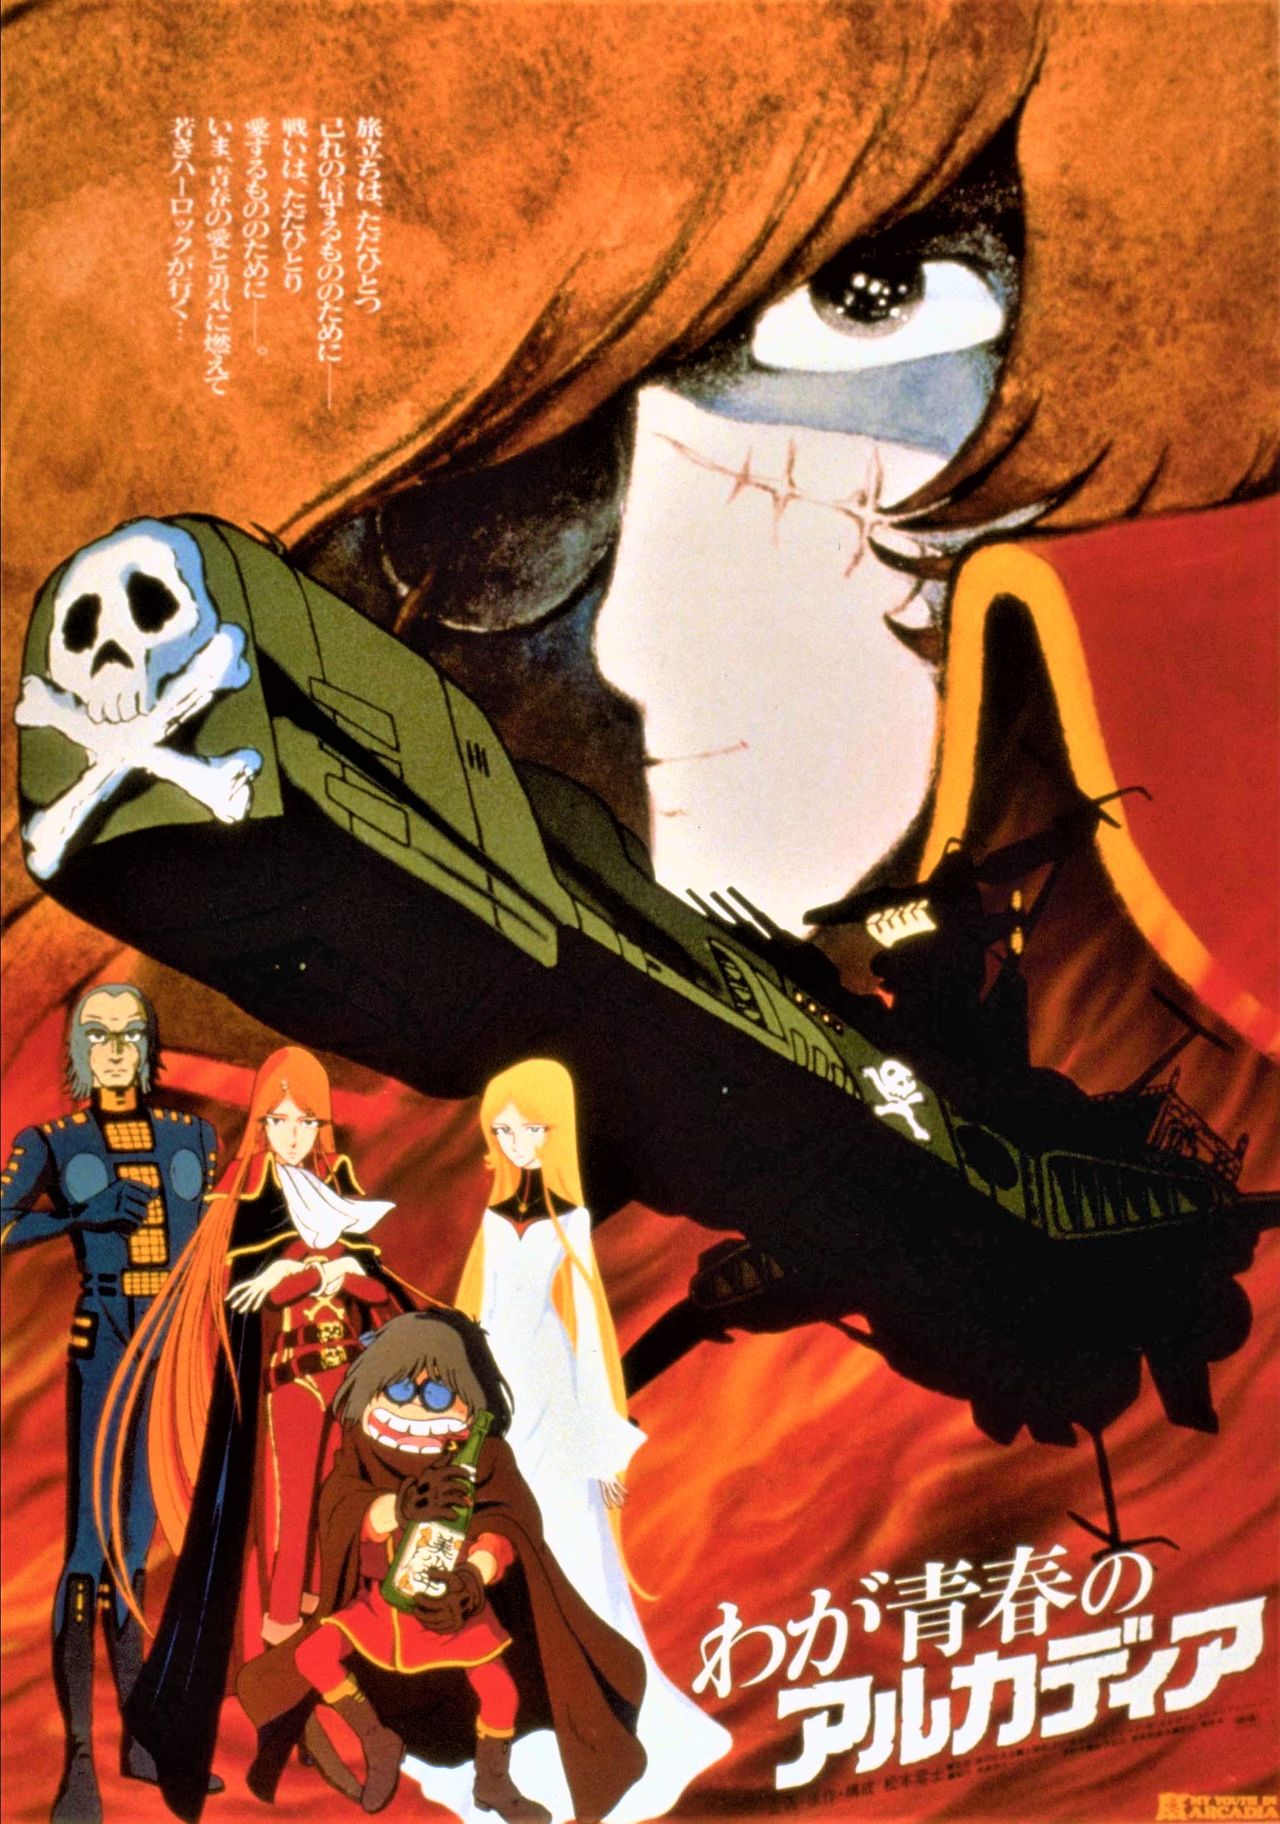 Space Pirate Captain Harlock aired in Japan in 1978–79. A 1982 theatrical version, Waga seishun no Arukadia (My Youth in Arcadia), told the story of Harlock’s younger adventures and how he came to meet his sidekick Ōyama Tochirō. (© Matsumoto Leiji / Tōkyū Agency; © Matsumoto Leiji / Tōei Animation)